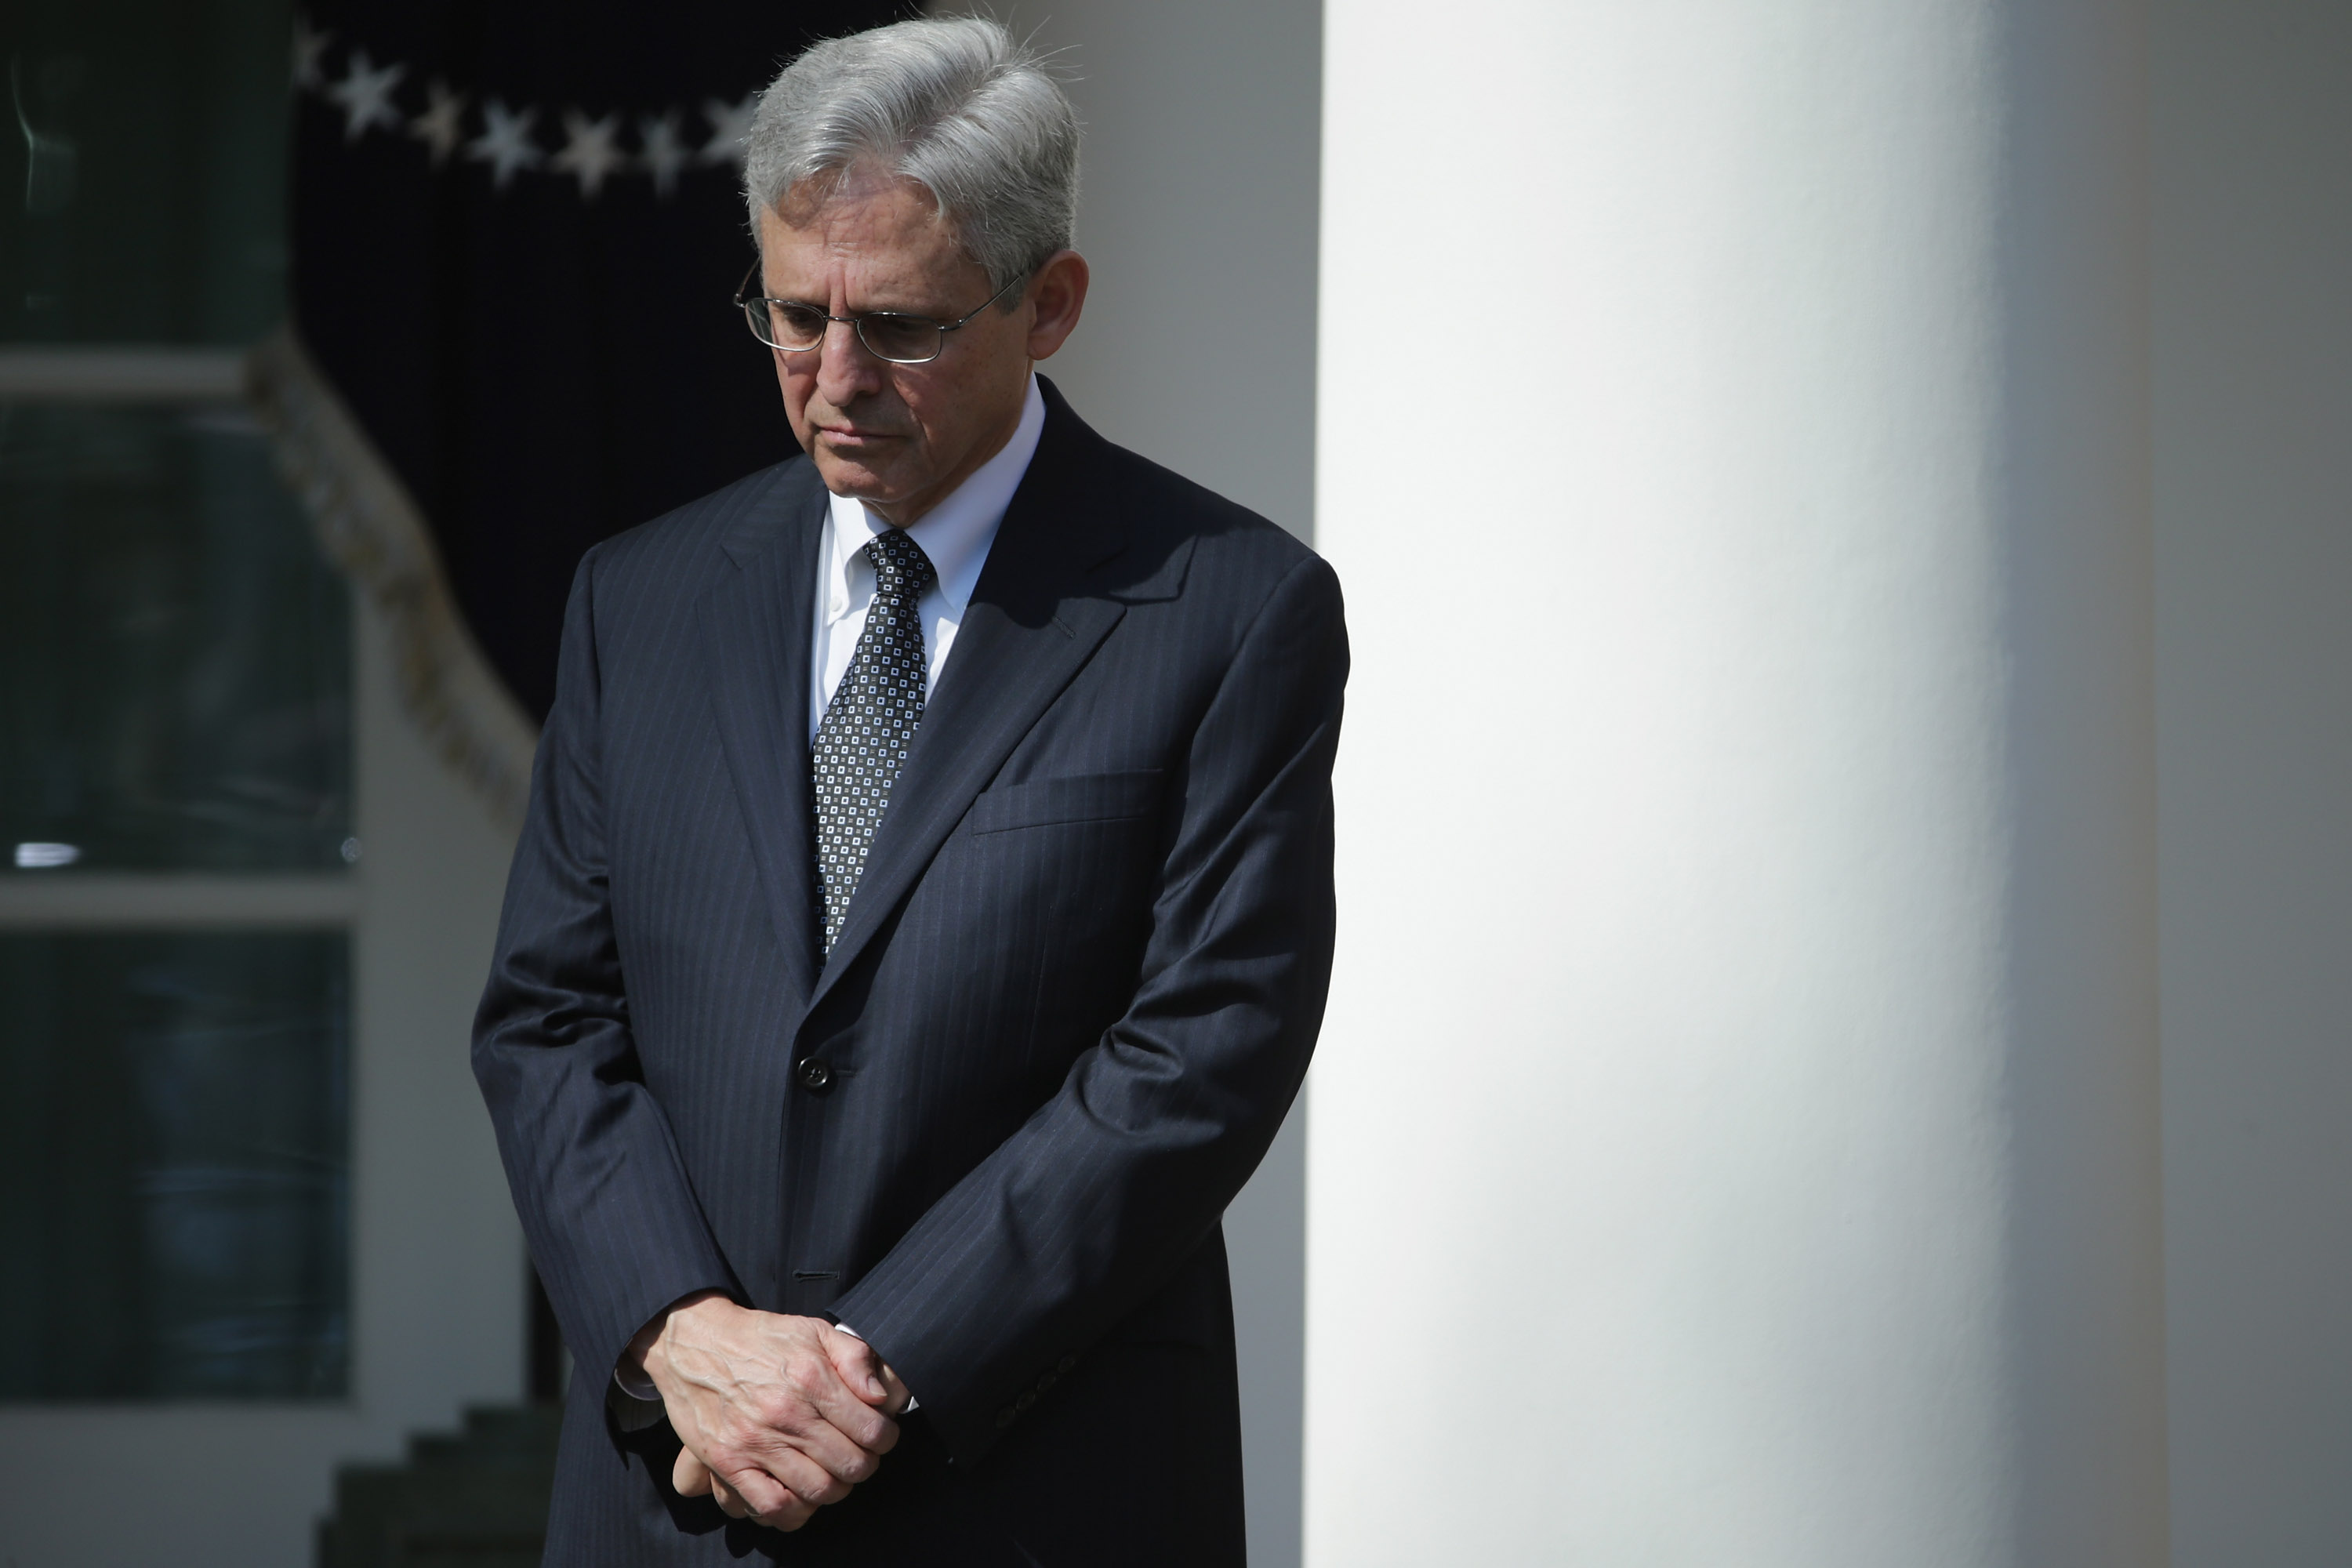 Judge Merrick Garland, U.S. President Barack Obama's nominee to replace the late Supreme Court Justice Antonin Scalia, is introduced in the Rose Garden at the White House in Washington, D.C., on March 16, 2016.